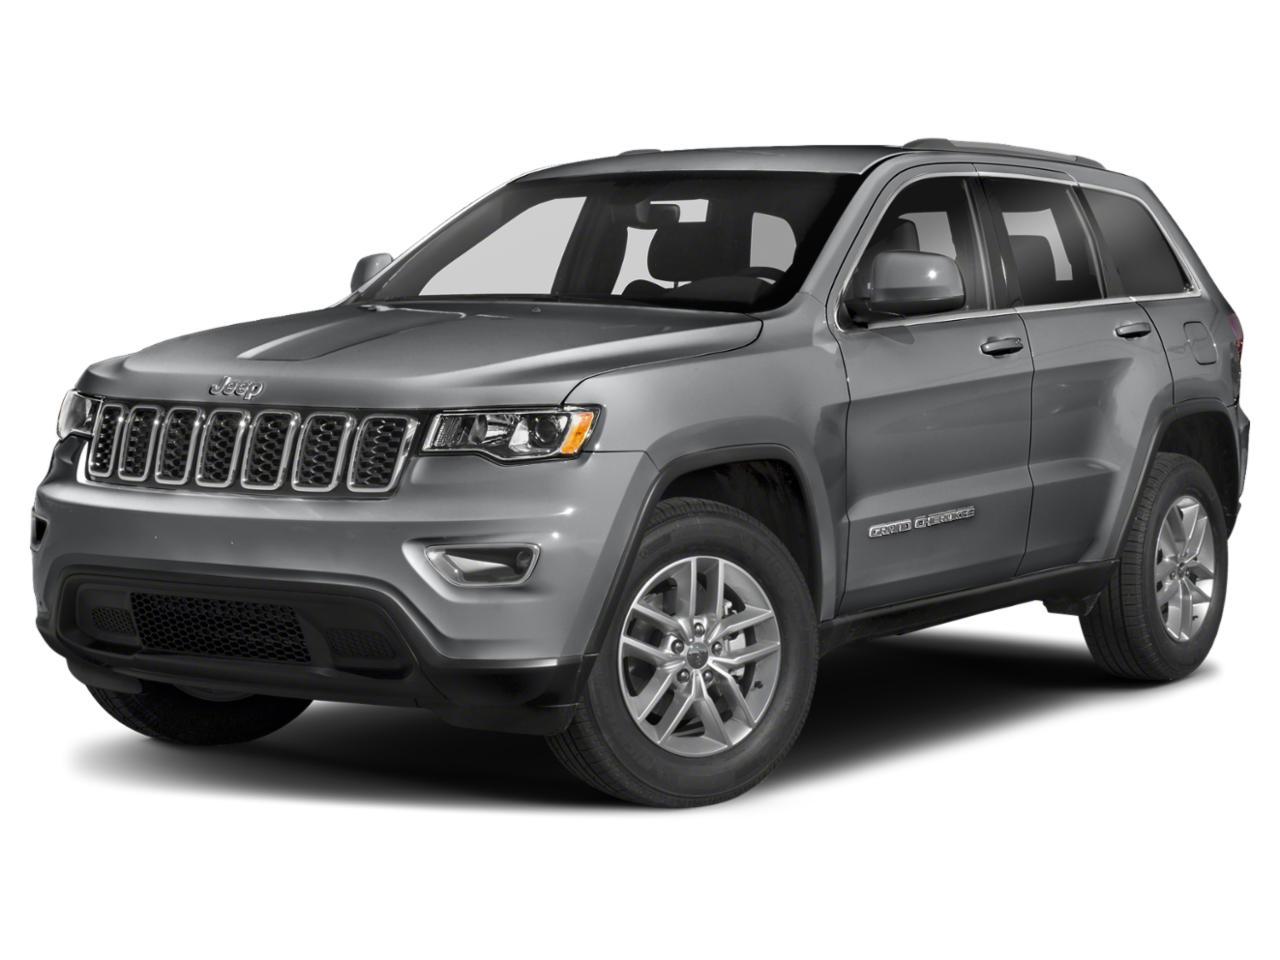 2019 Jeep Grand Cherokee Vehicle Photo in Pilot Point, TX 76258-6053